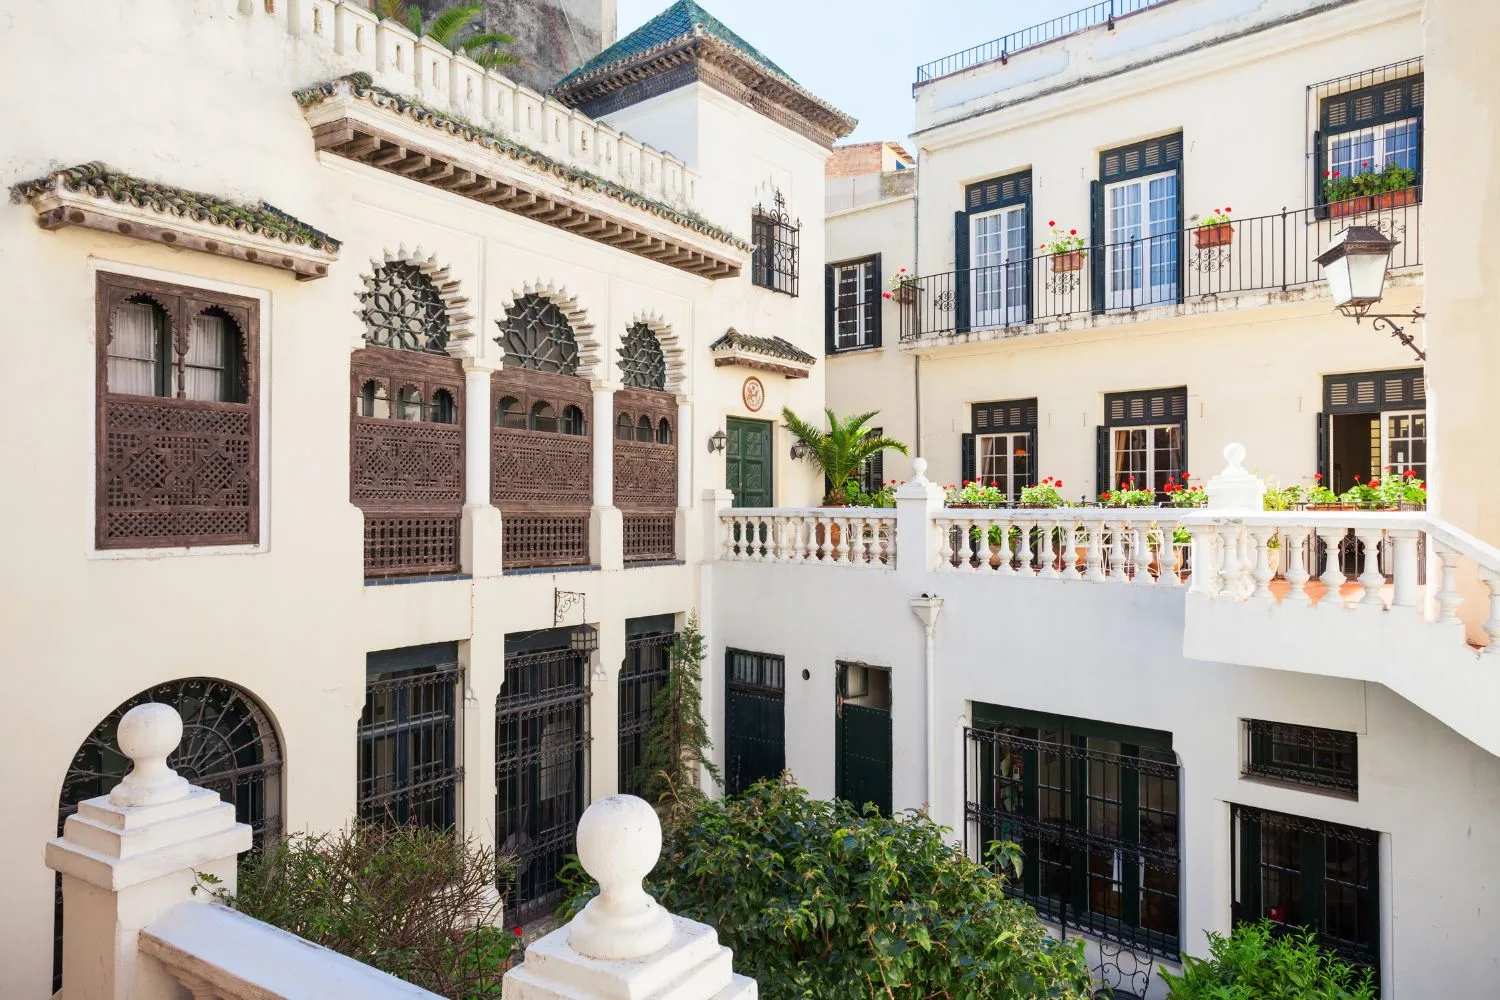 The exterior of Tangier American Legation Institute of Moroccan Studies